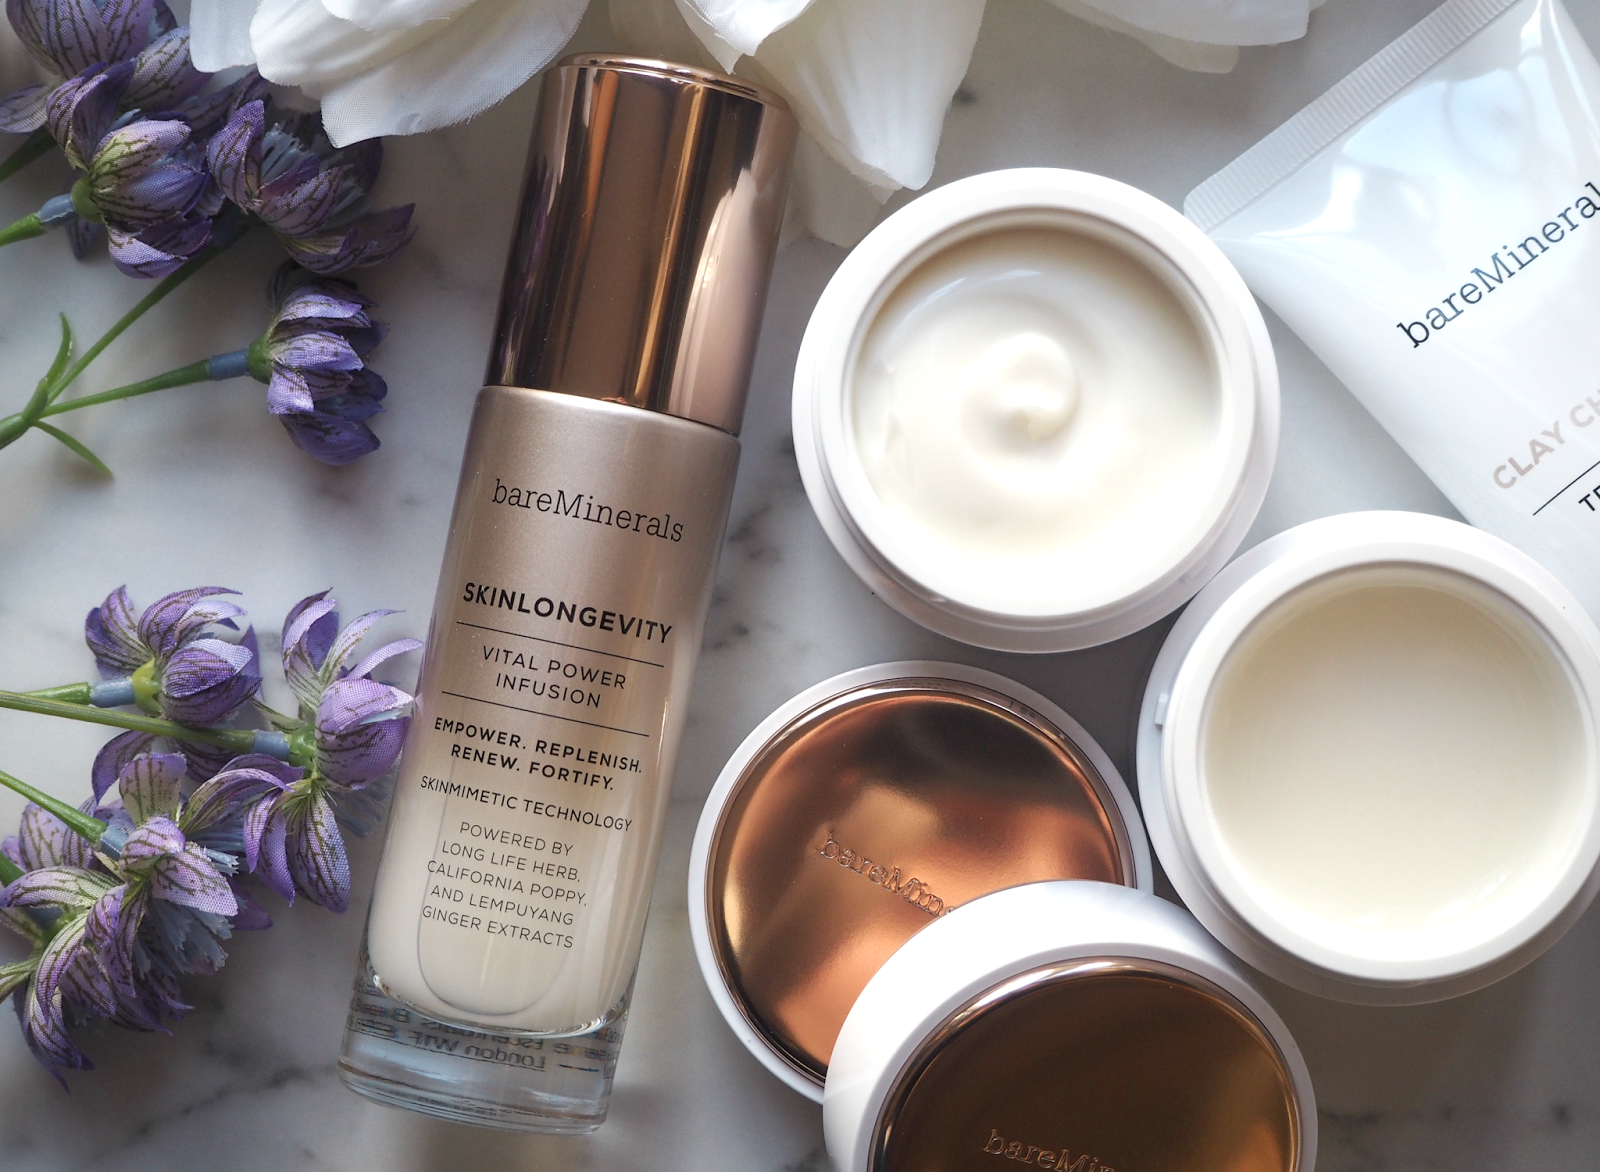 Age Perfecting Skincare Made With The 'Herb Of Life': BareMinerals NEW Skin Longevity